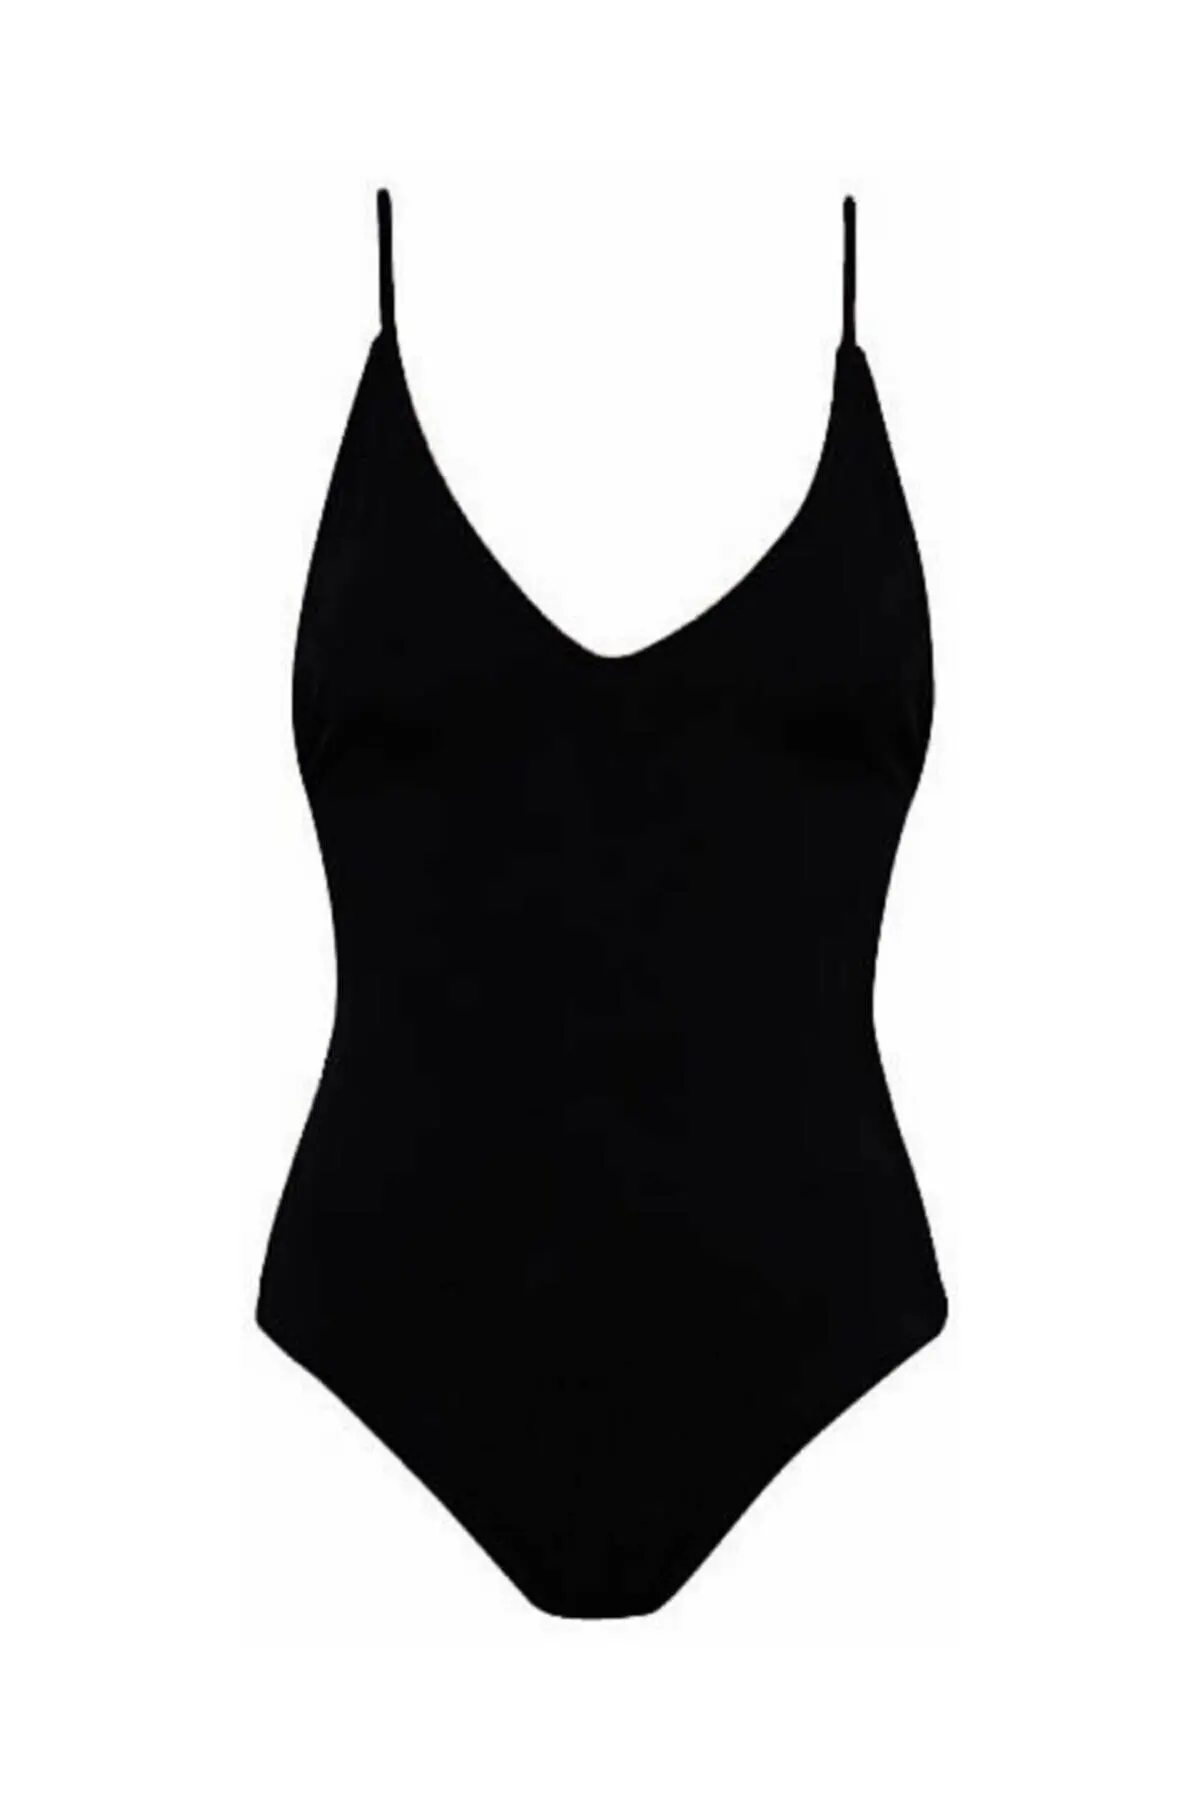 LOOK FOR YOUR WONDERFUL NIGHTS WITH ITS STUNNINGWomen's Black Cross Back Drawstring Swimsuit  FREE  SHIPPING